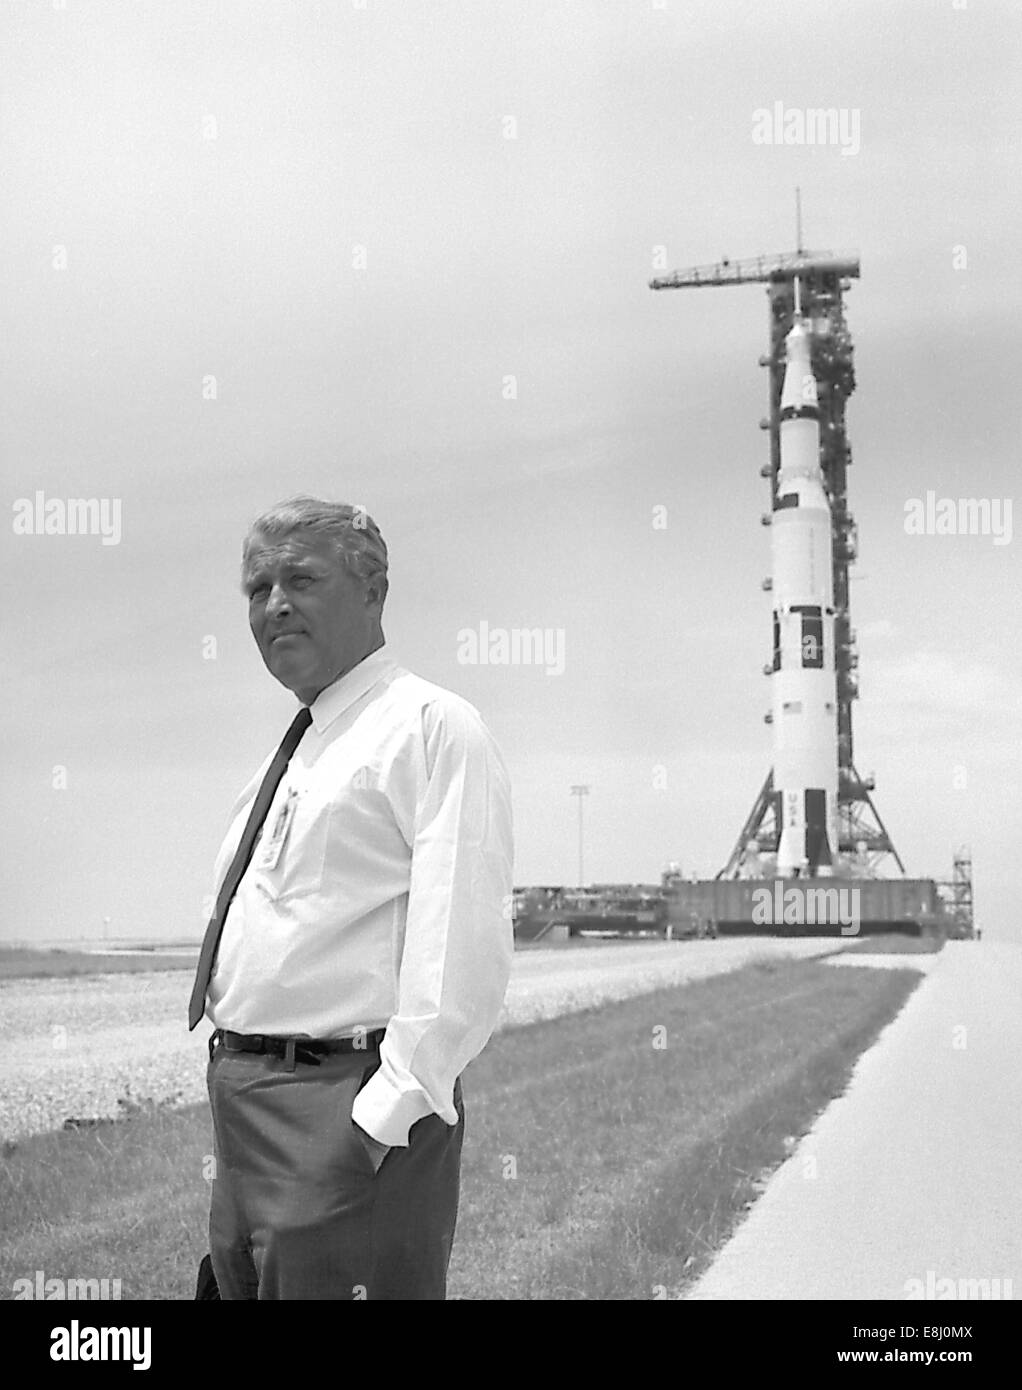 Dr. Von Braun with Apollo 11 Spacecraft In the background. (MIX FILE) Ready To Go To The Moon Stock Photo